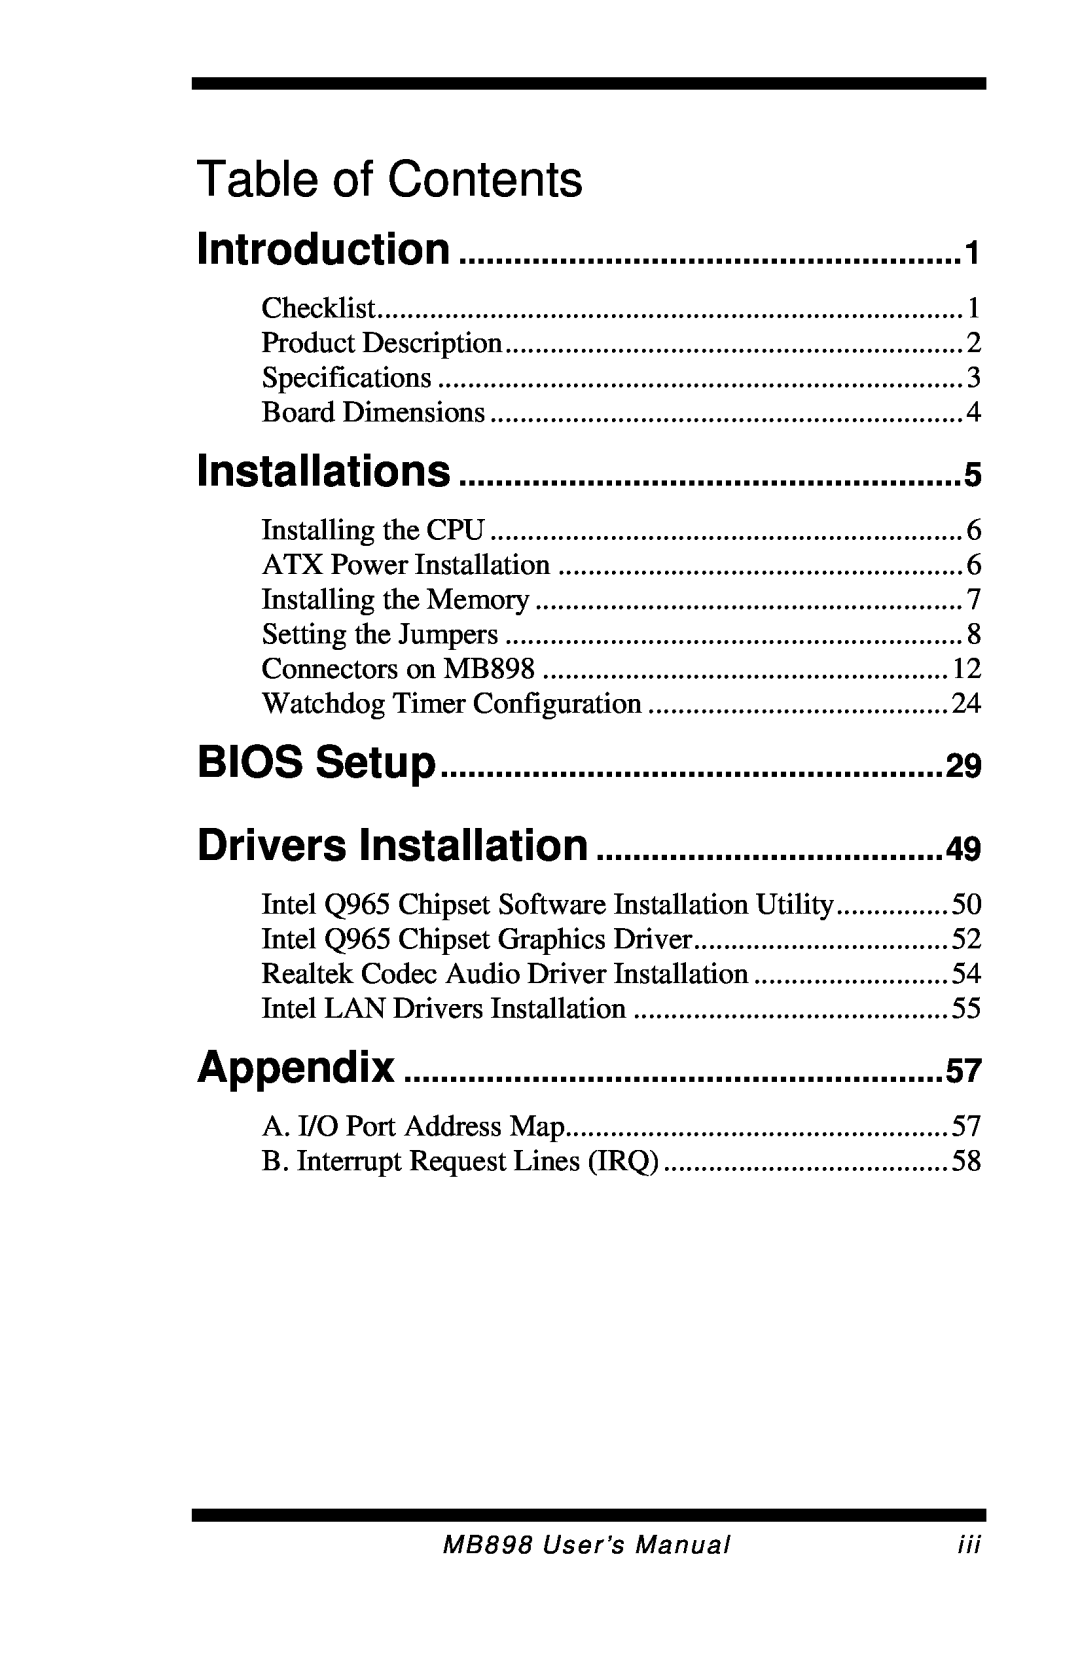 Intel MB898RF, MB898F user manual Introduction, Installations, BIOS Setup, Drivers Installation, Appendix, Table of Contents 